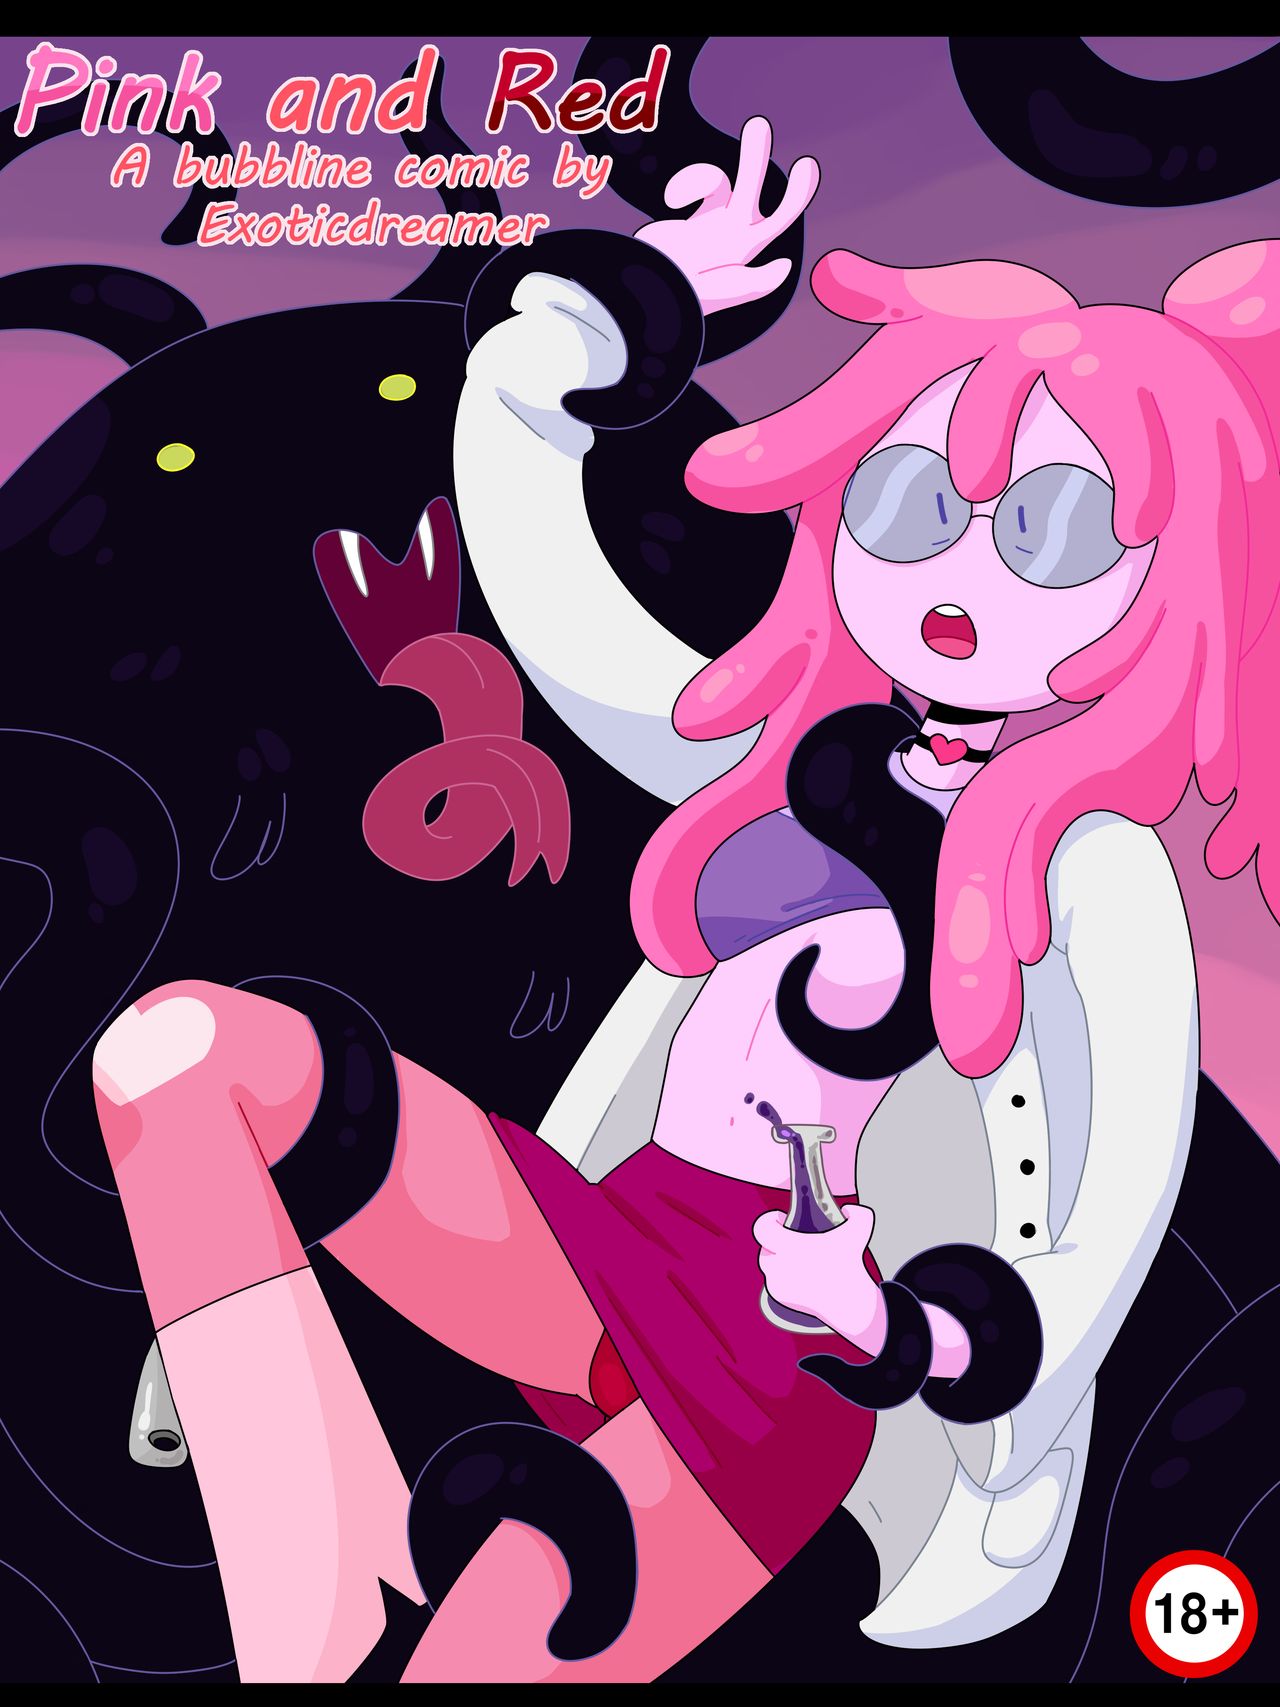 Pink and Red – Bubbline Comic - 0e6771346bc899630d7c4a9493968c03